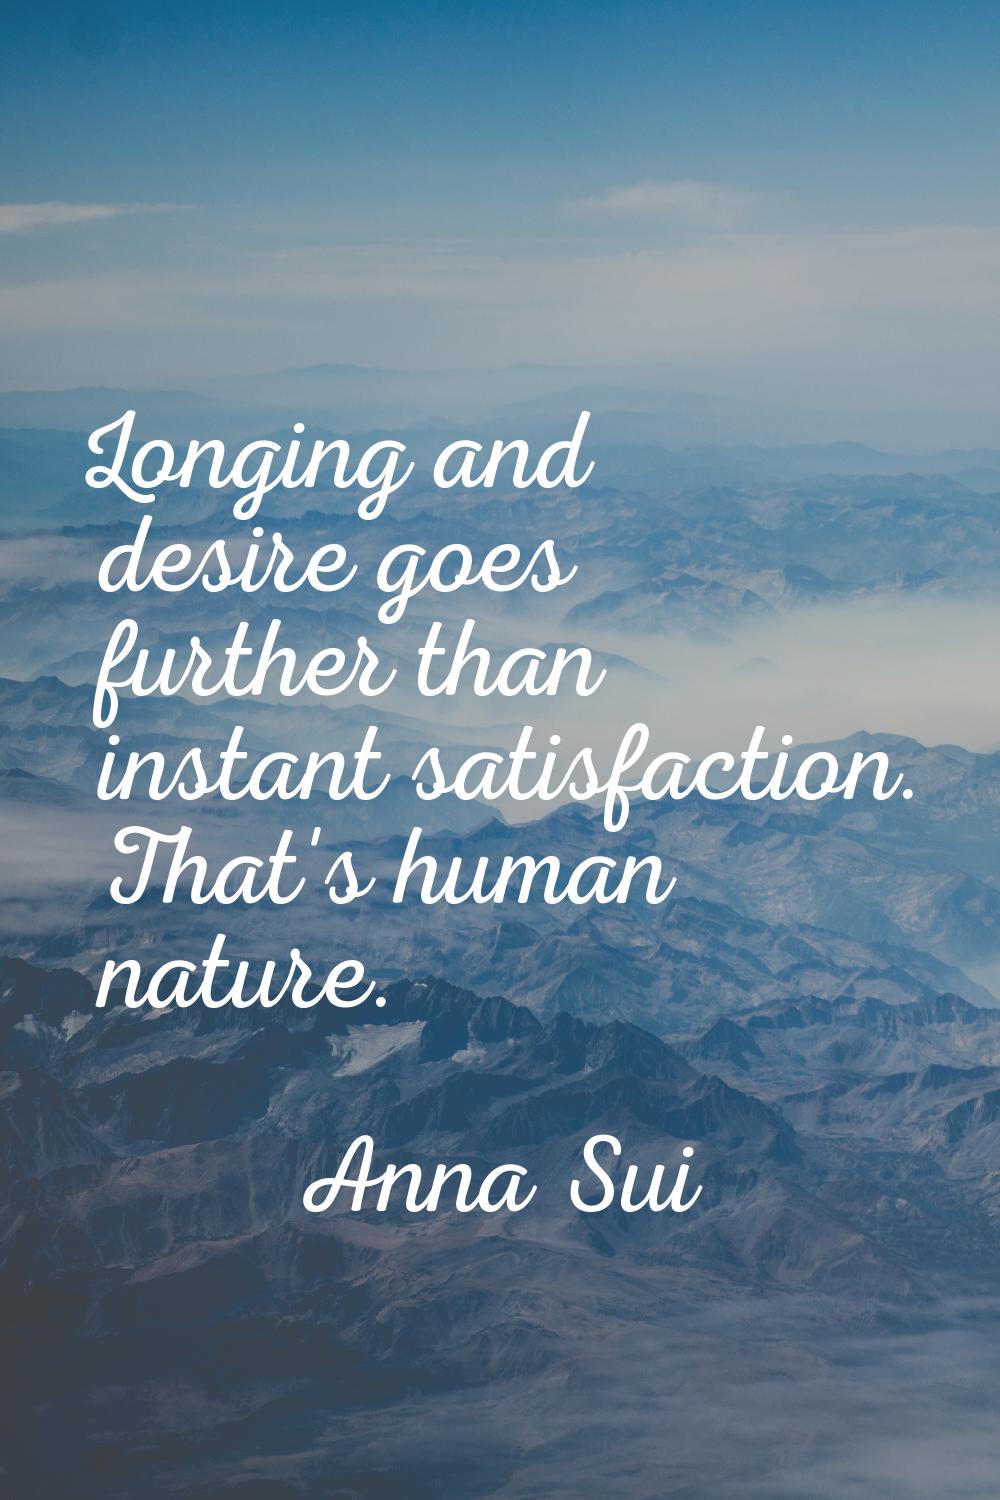 Longing and desire goes further than instant satisfaction. That's human nature.